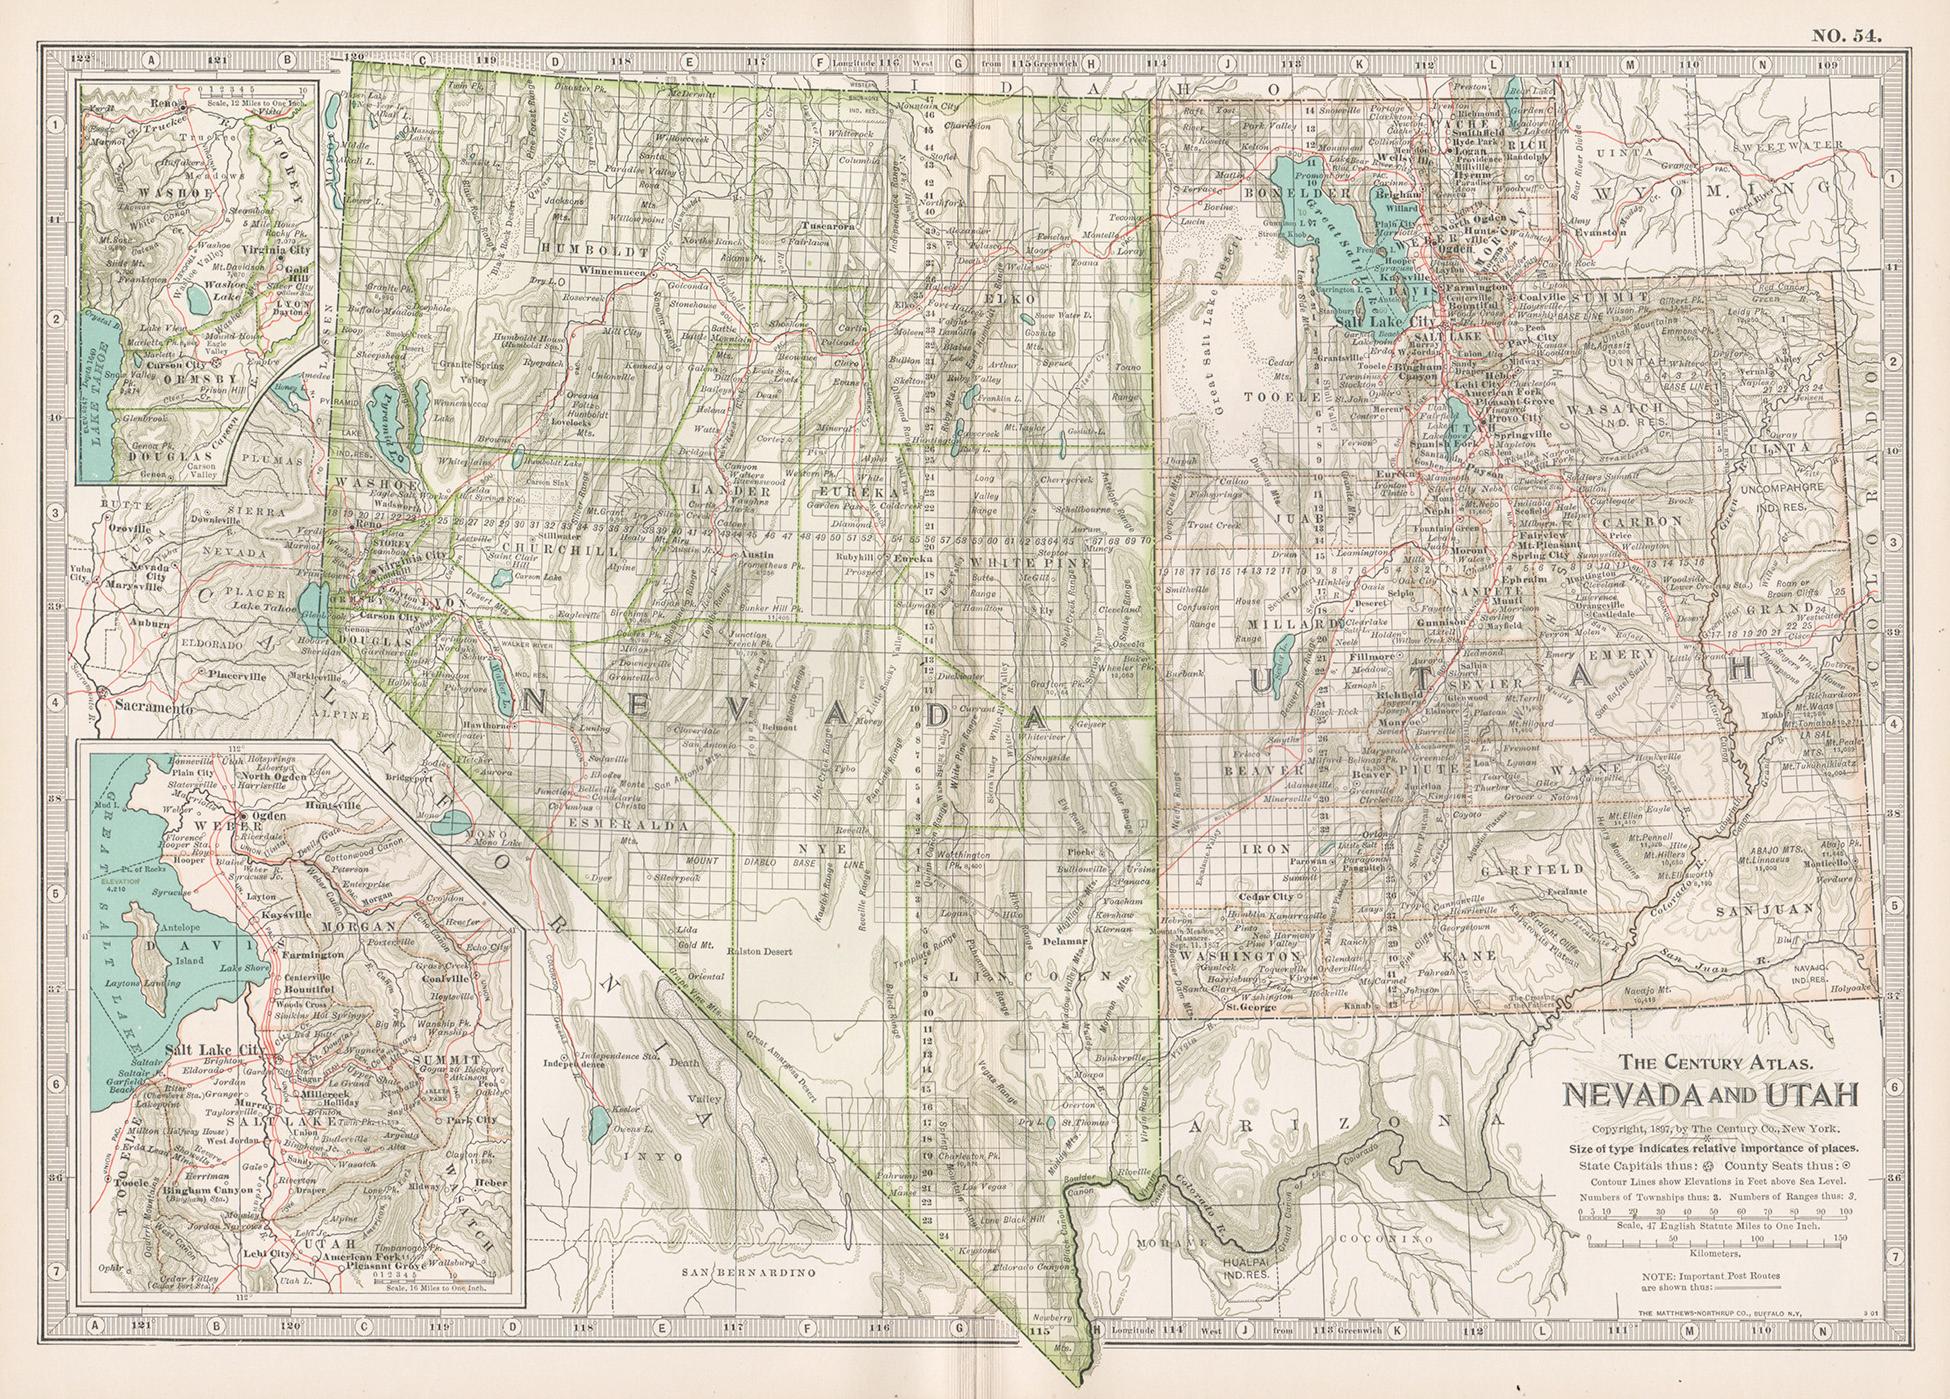 Unknown Print - Nevada and Utah. USA. Century Atlas state antique vintage map